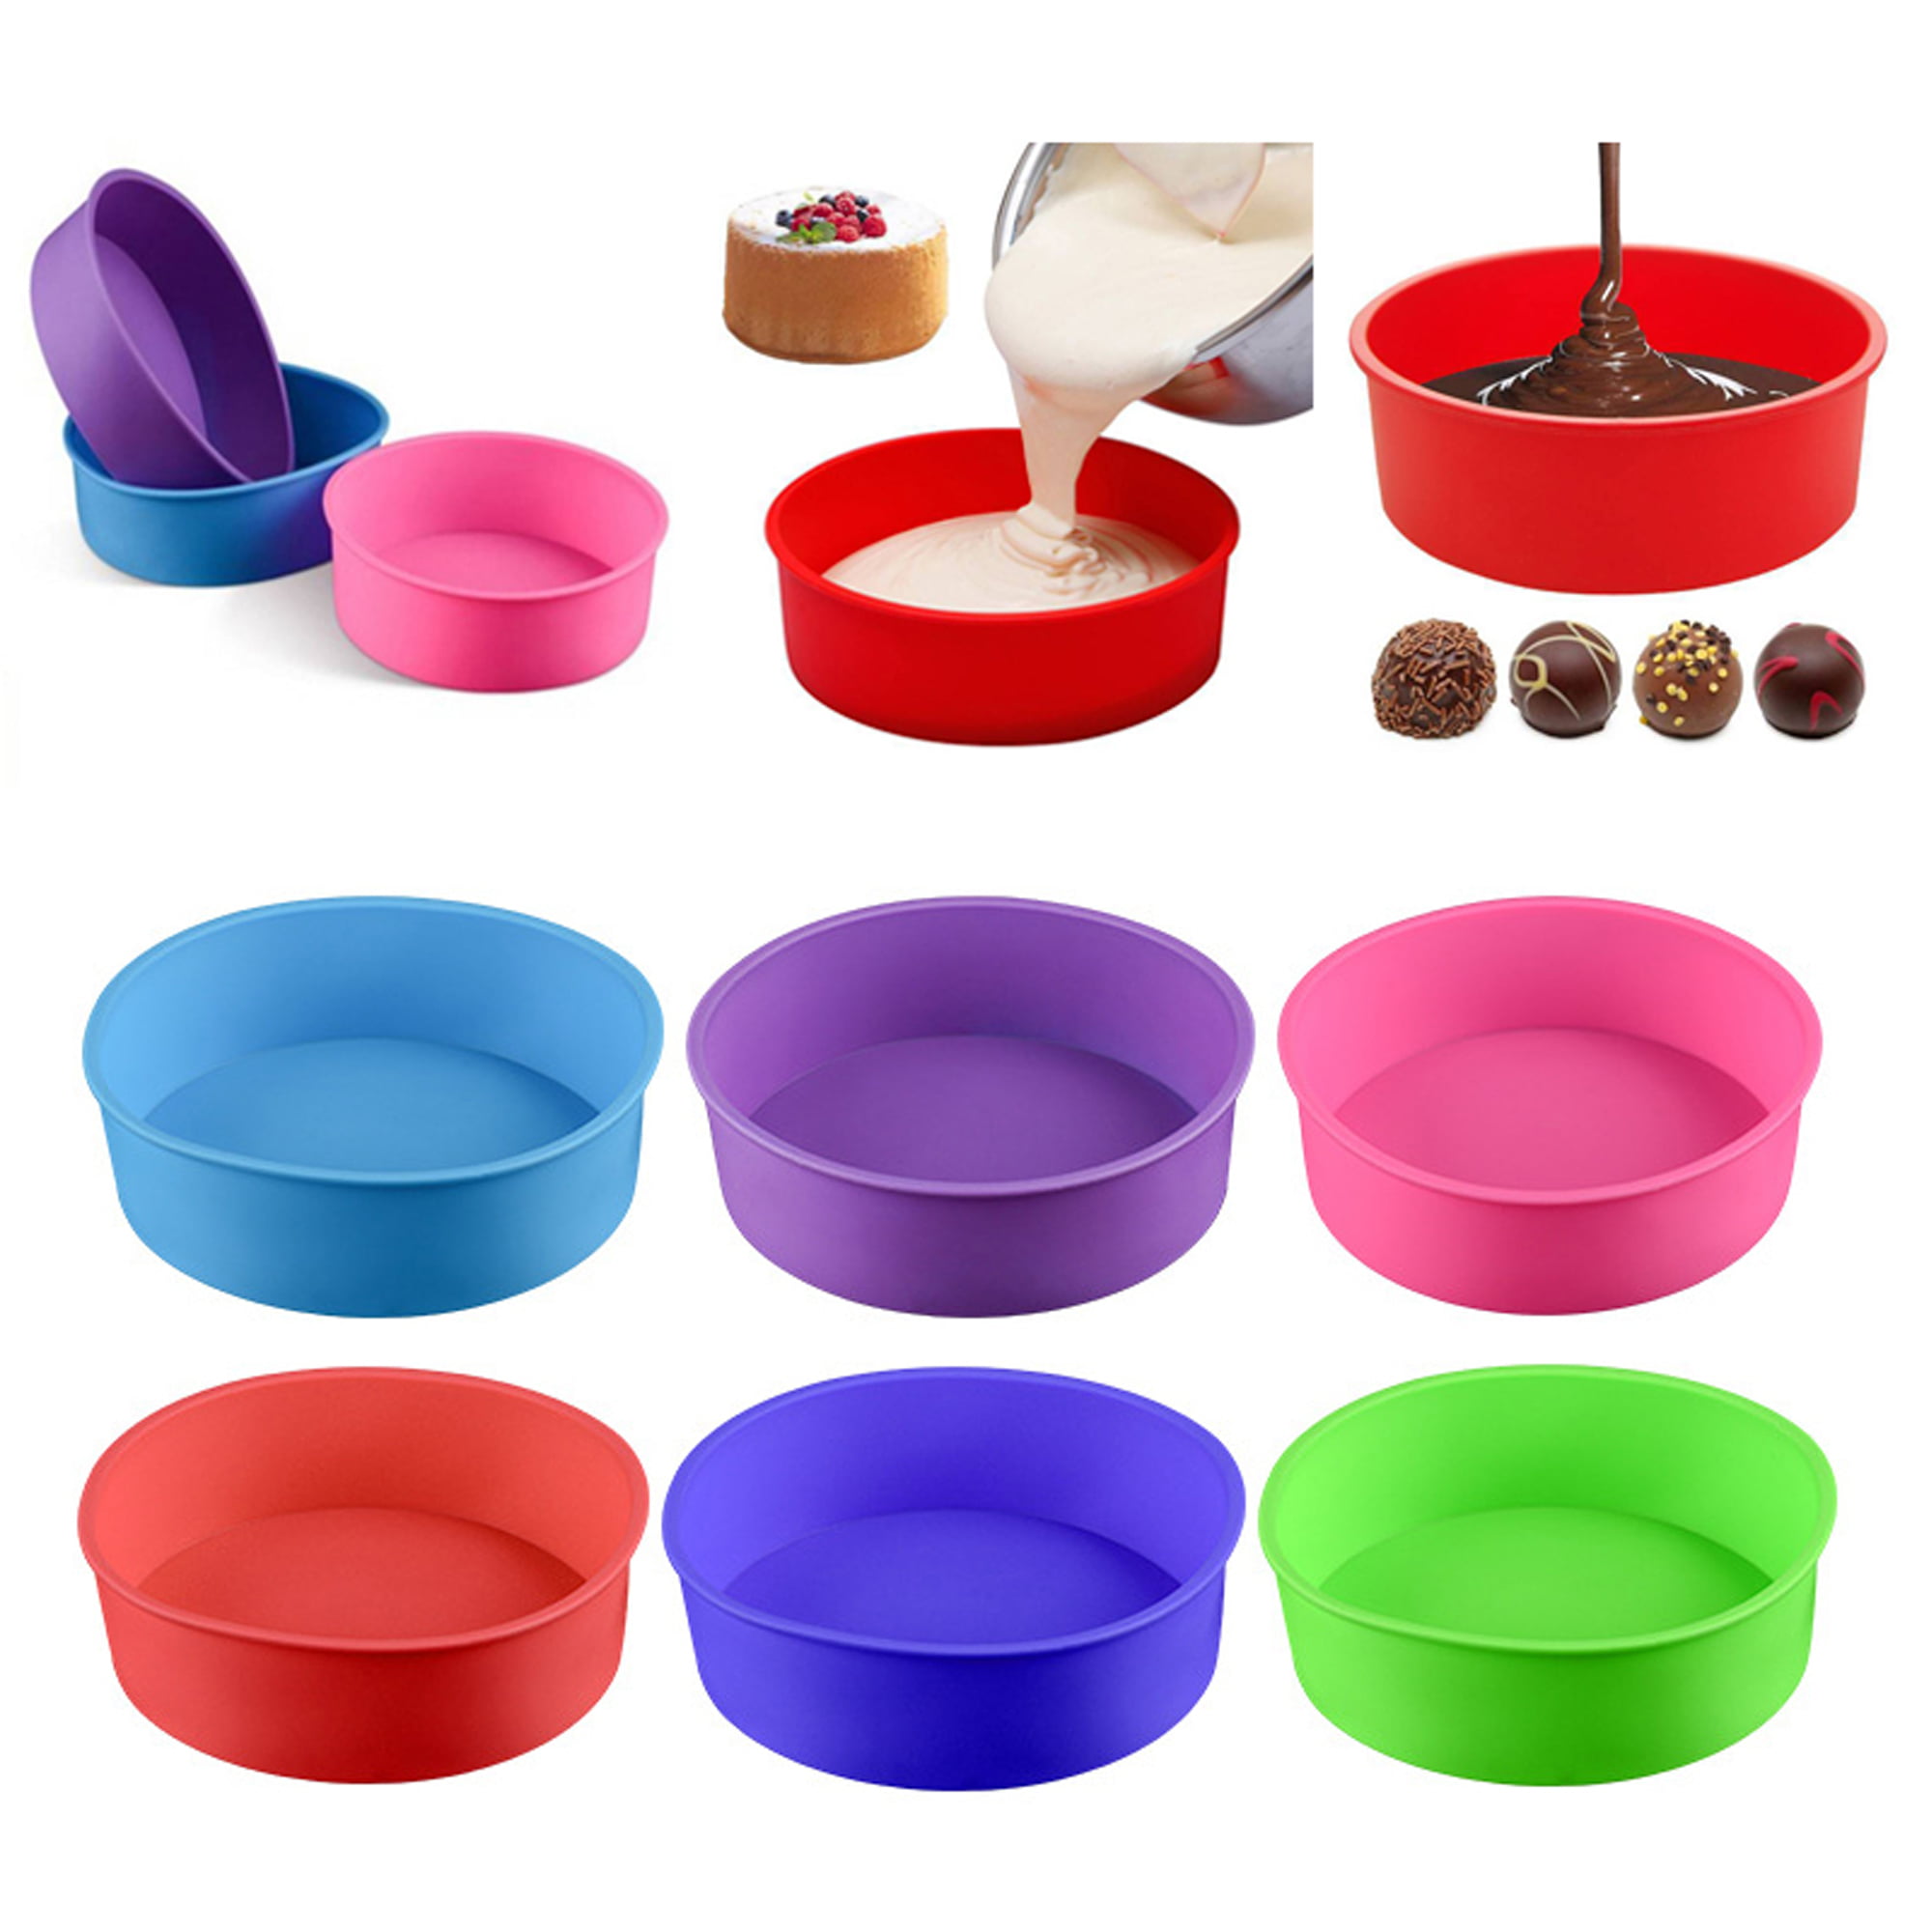 10" DIY Round Silicone Cake Tin Form Baking Pan Bread Pastry Bakeware Mold Mould